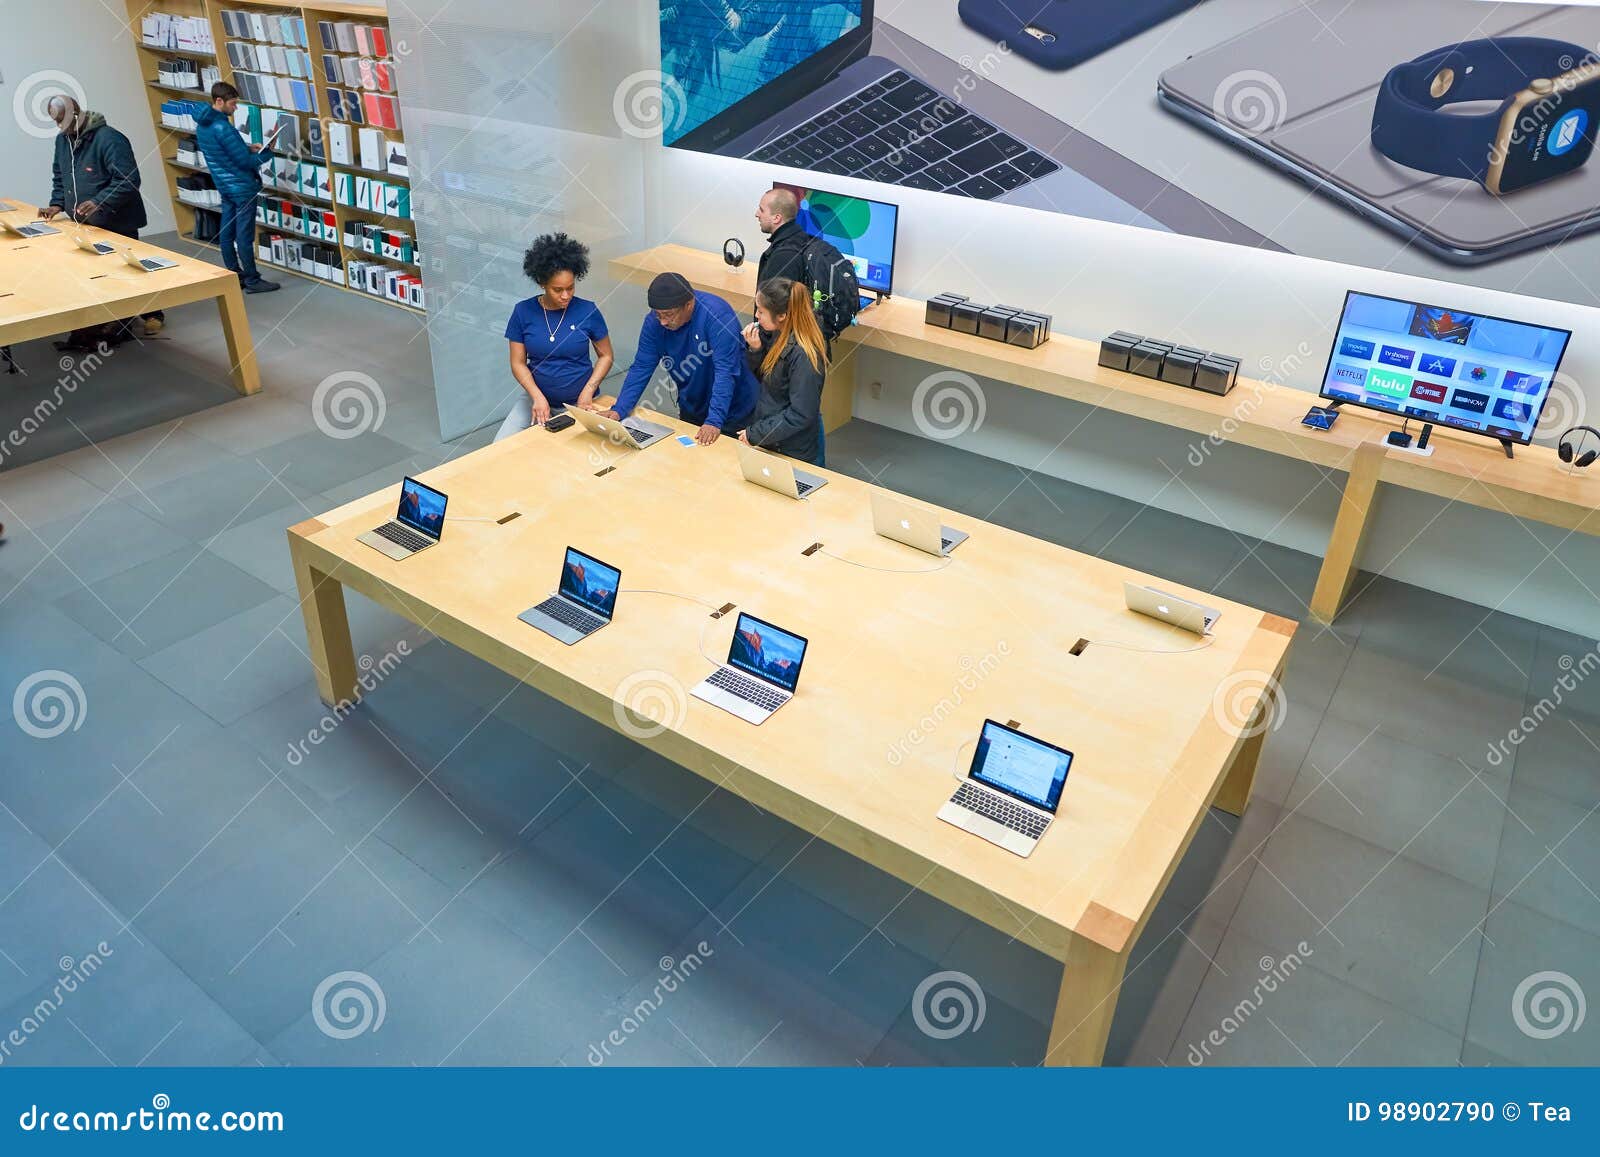 Apple Store Editorial Image Image Of Technology Interior